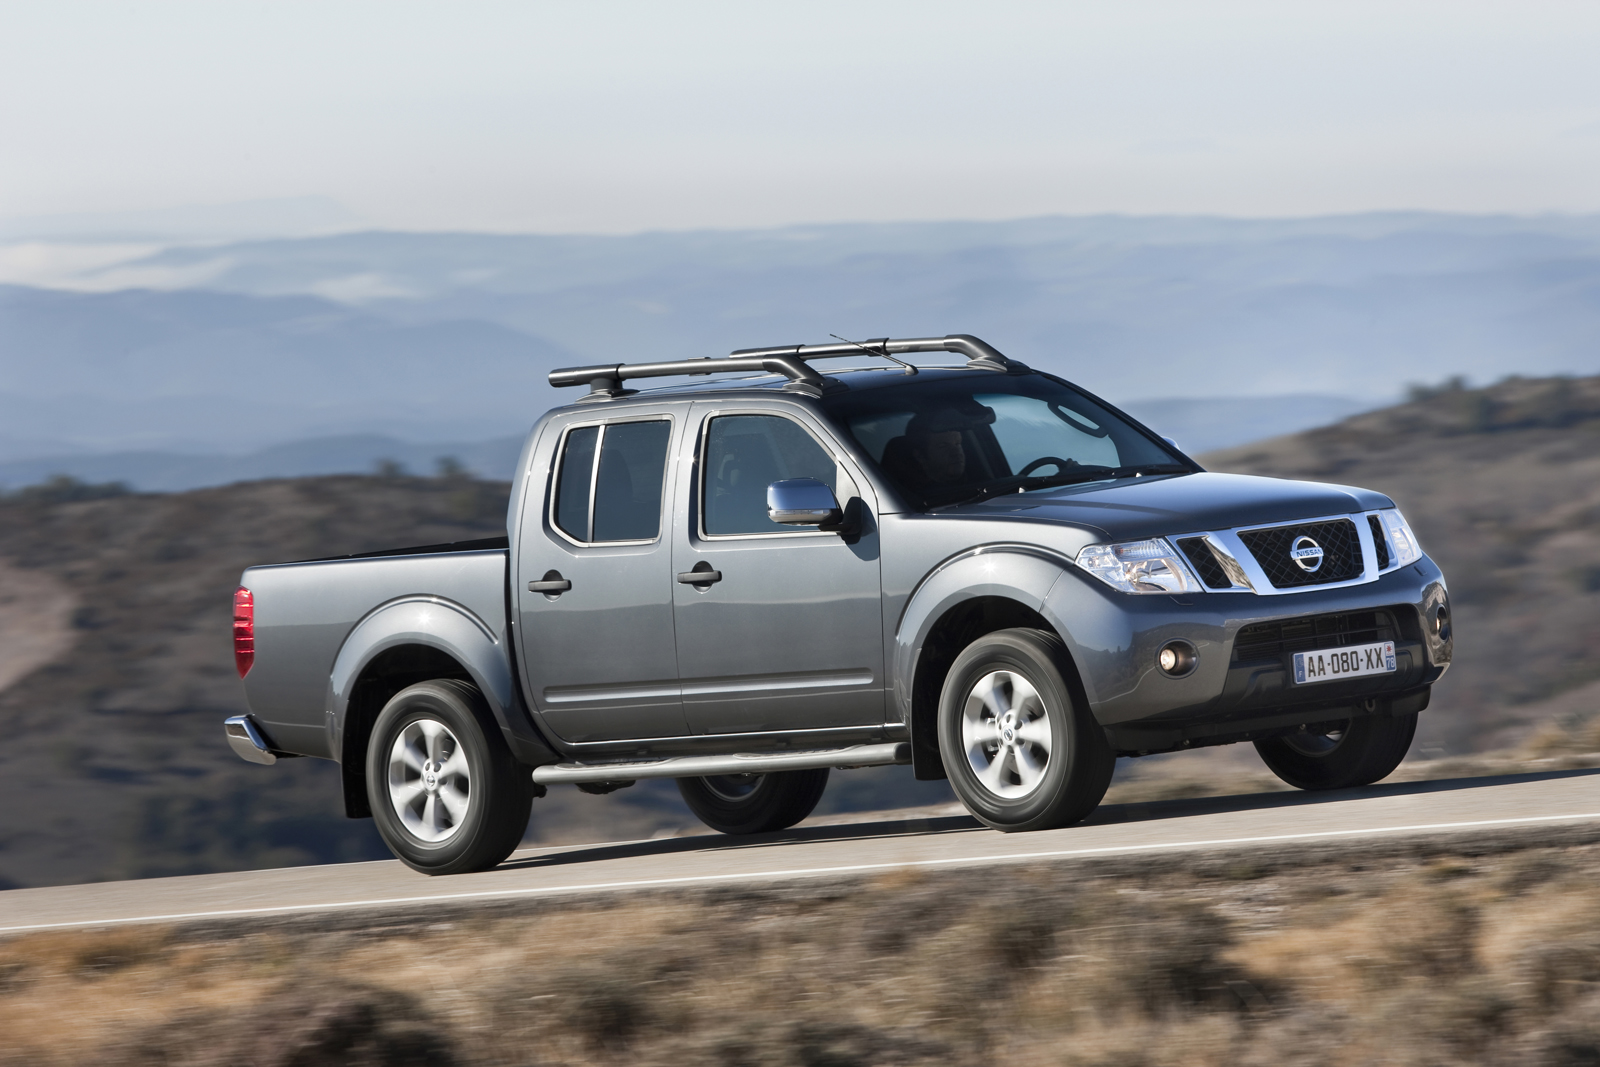 Nissan Updates… Old Navara in Europe for the 2015 Model Year